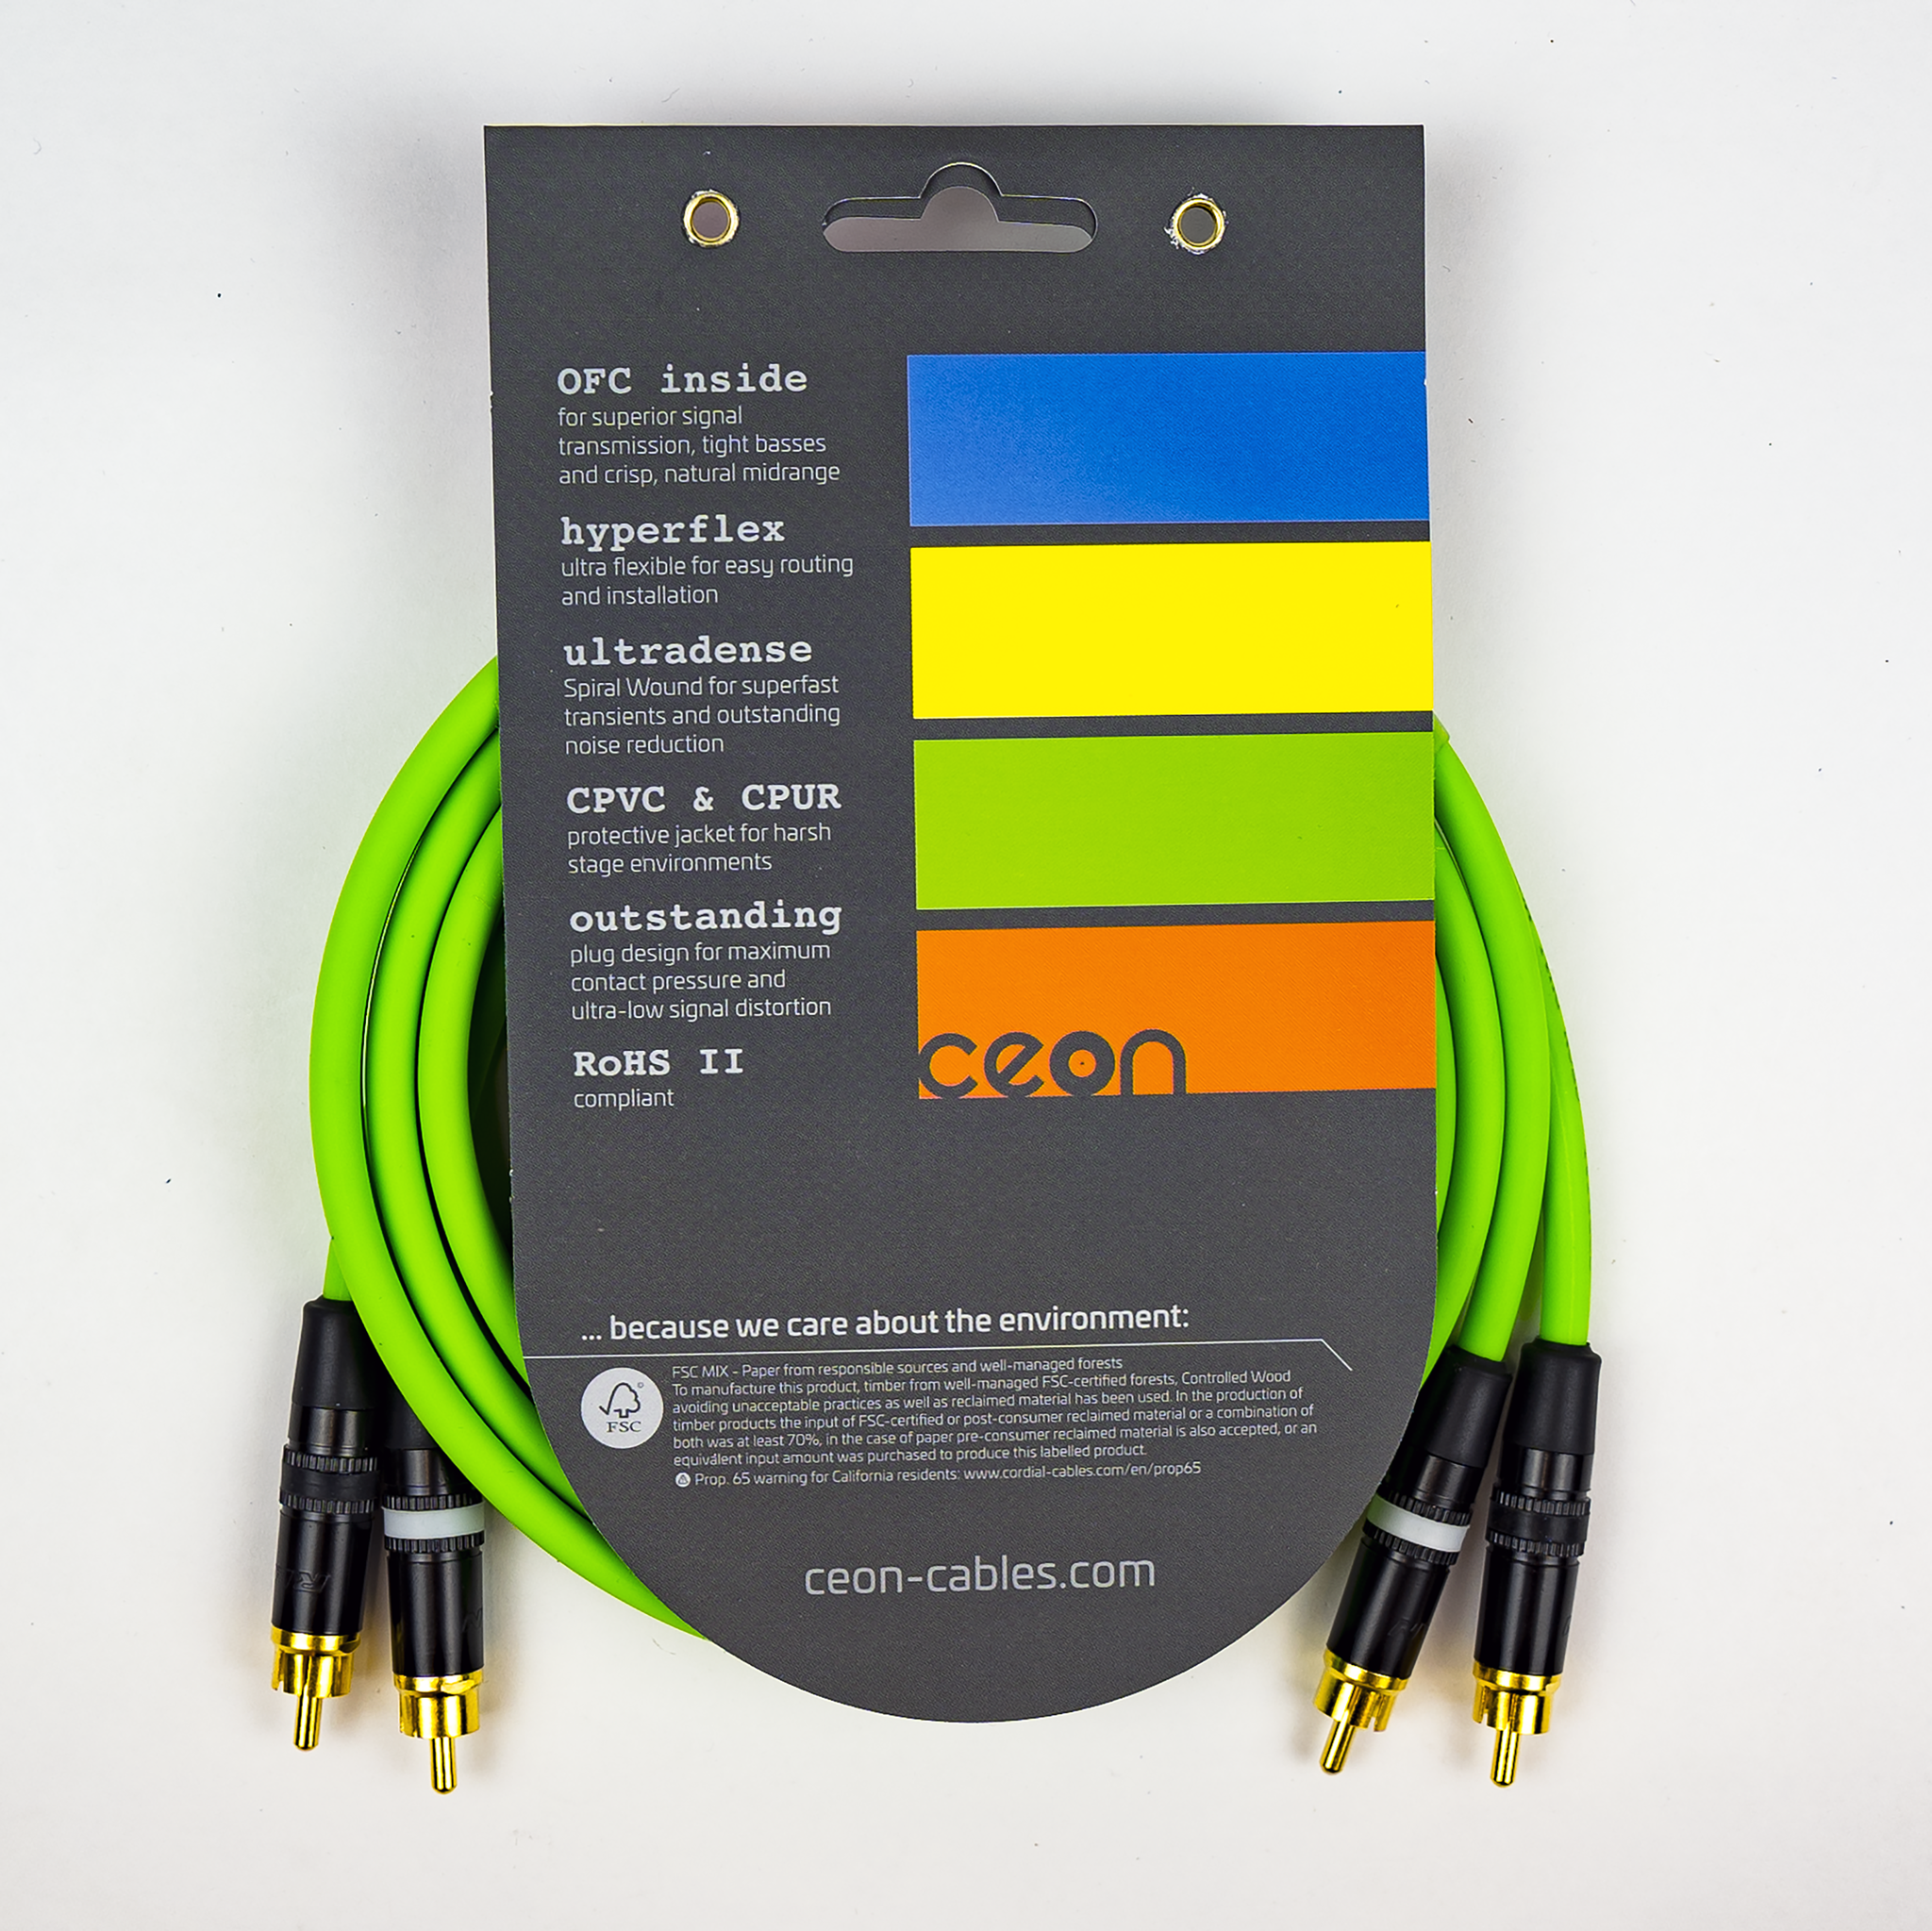 Cordial Cables Premium DJ Dual/Mono (Black Light) Cable, Ceon Series - Hi-Flex DJ's Choice Stereo RCA to RCA 10-Foot Cable: Neon Green